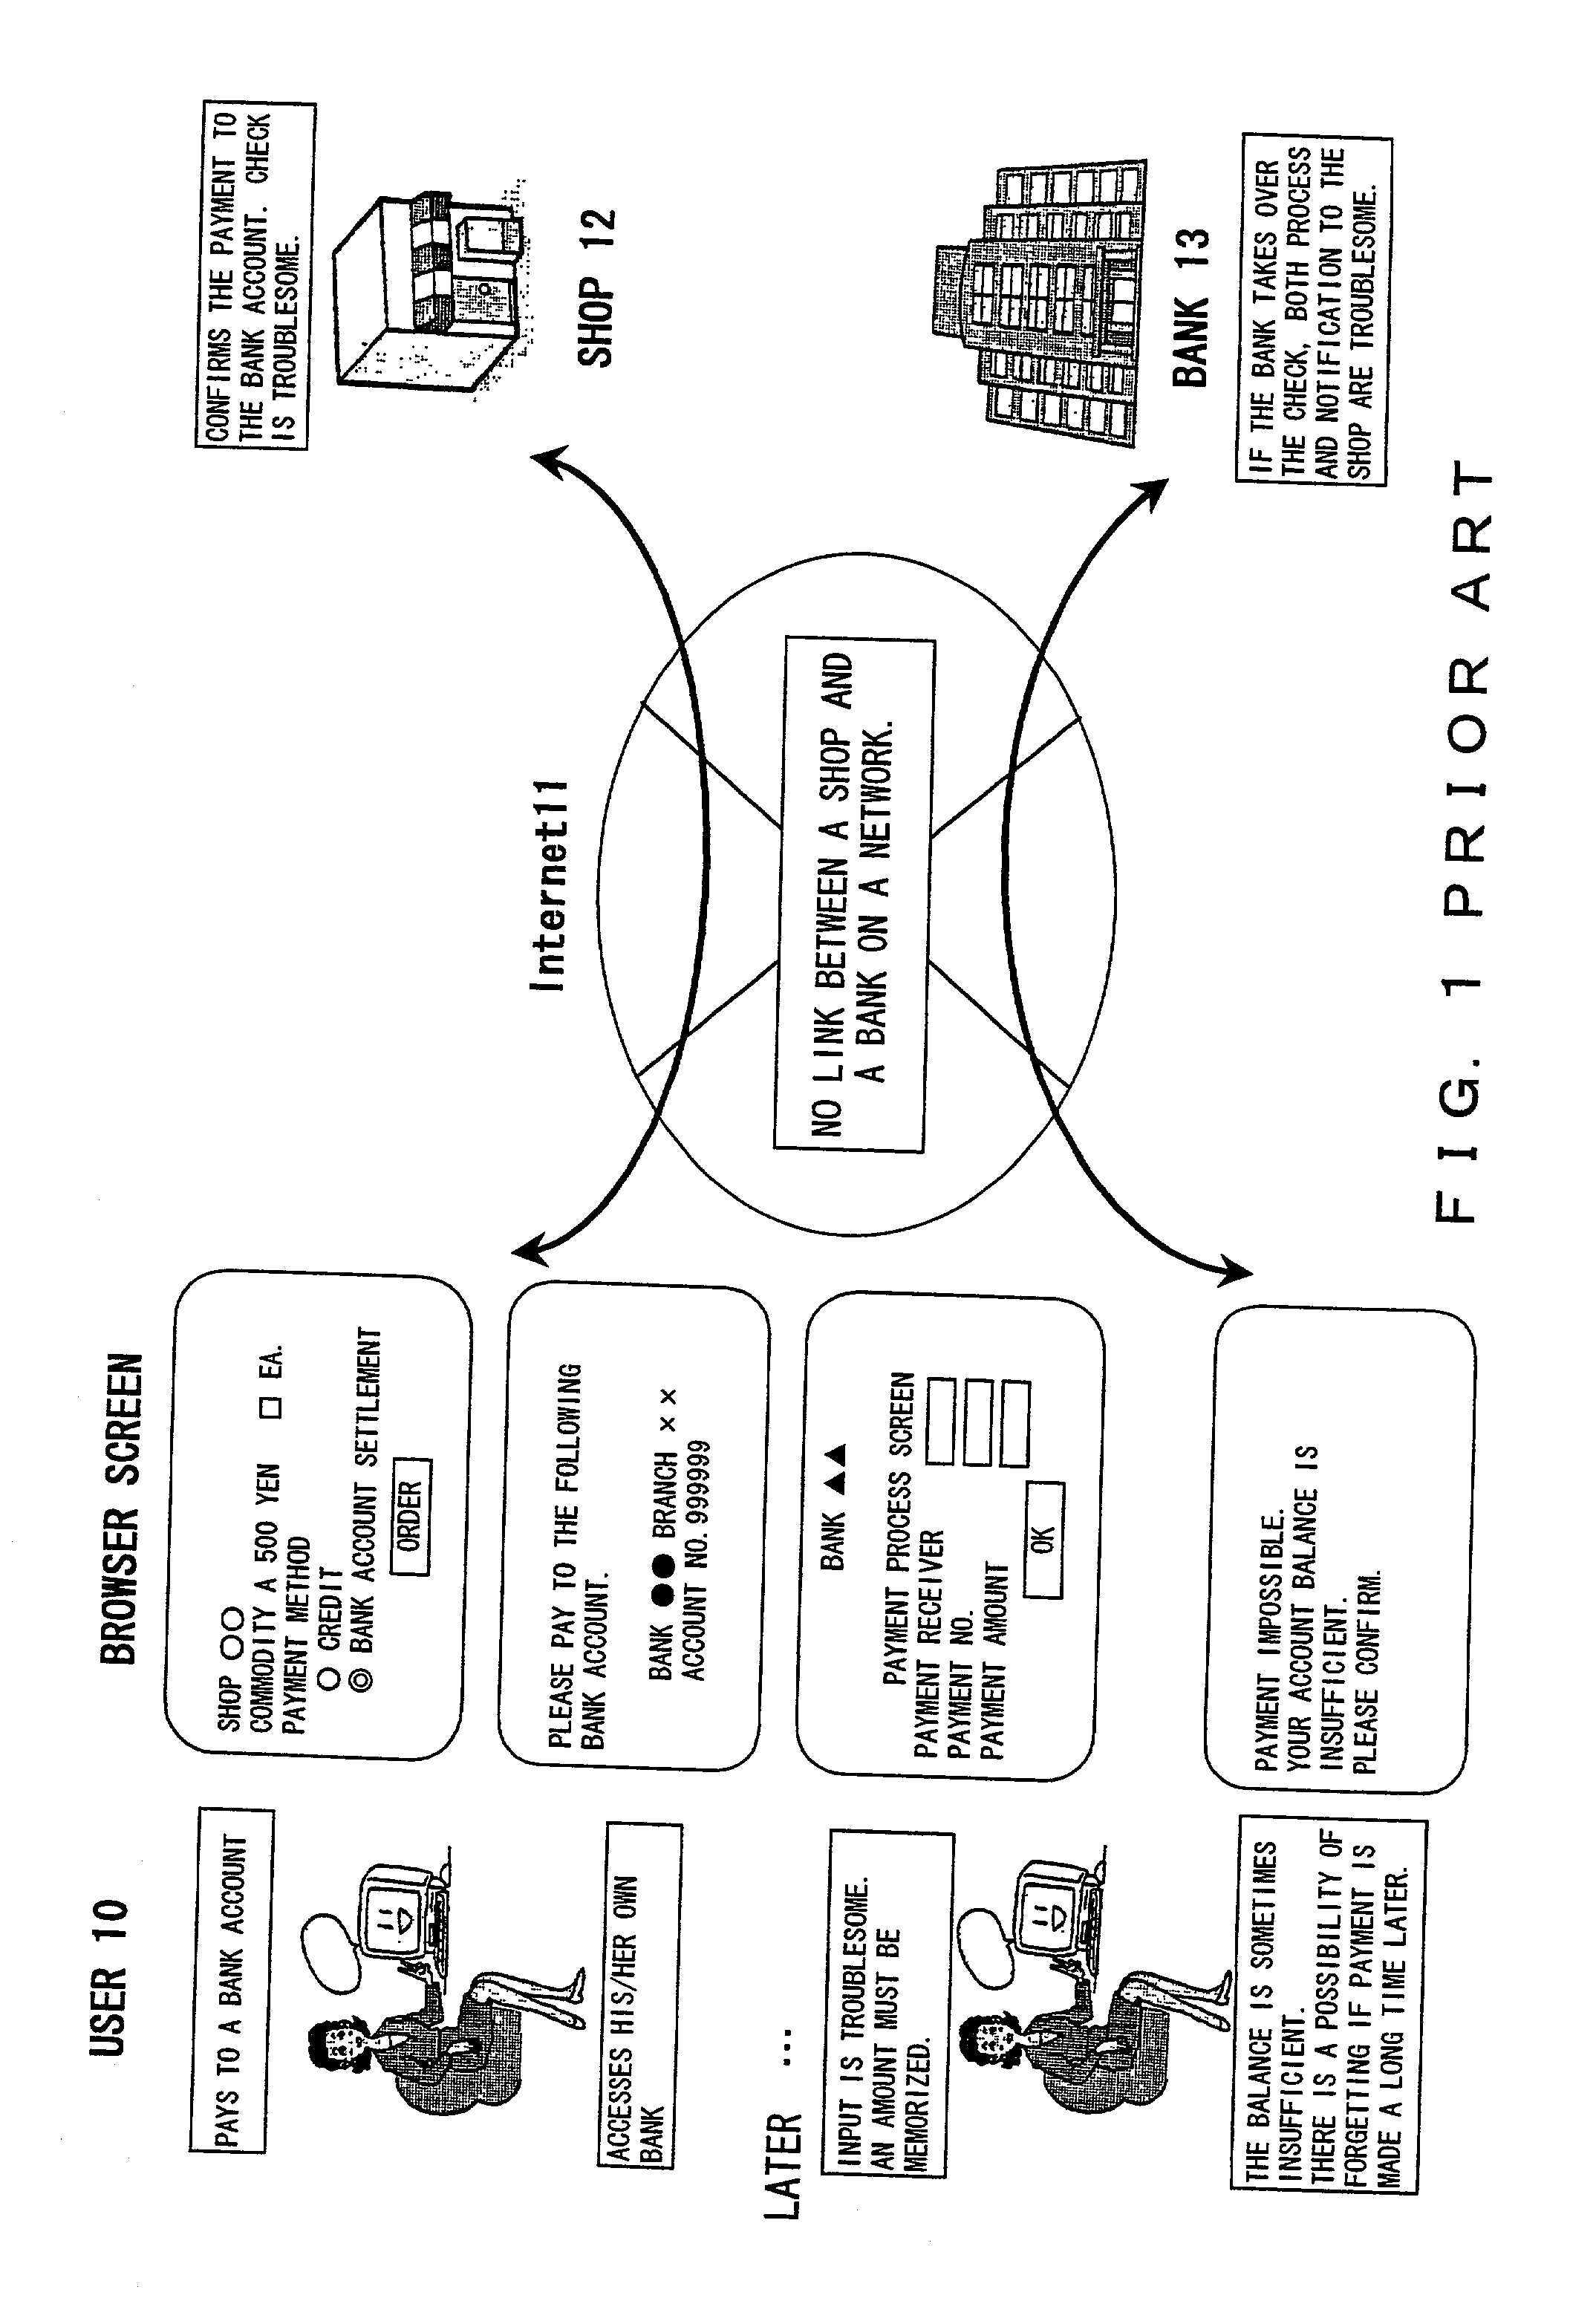 Online settlement system, method thereof and storage medium